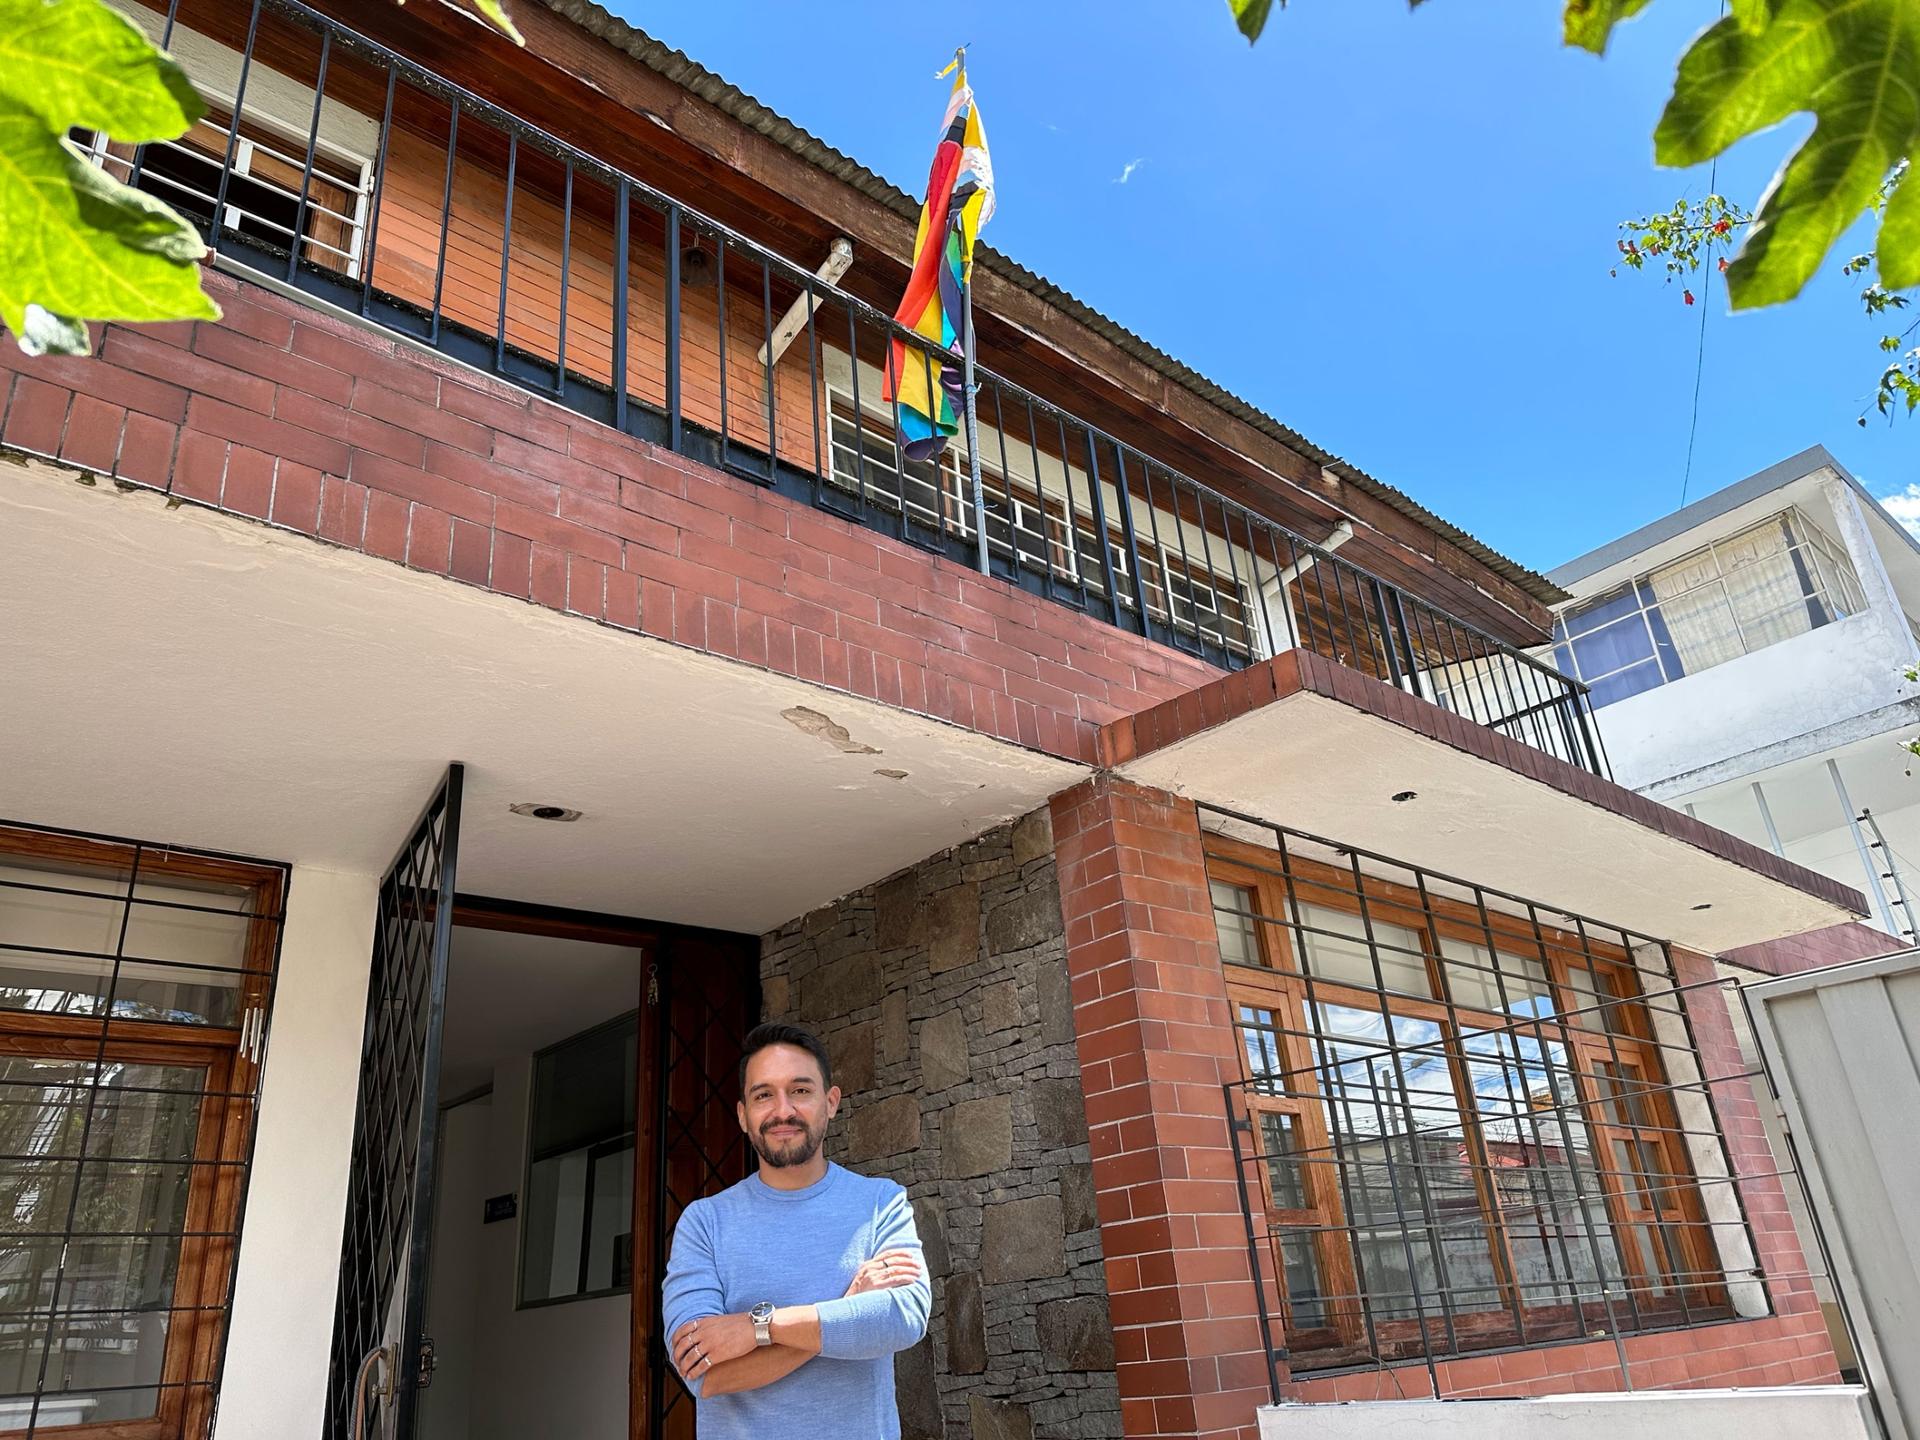 Danilo Manzano is the co-founder and executive director of Dialogo Diverso, an organization that provides legal, health and social services to LGBTQ people and is based in the house where he grew up.